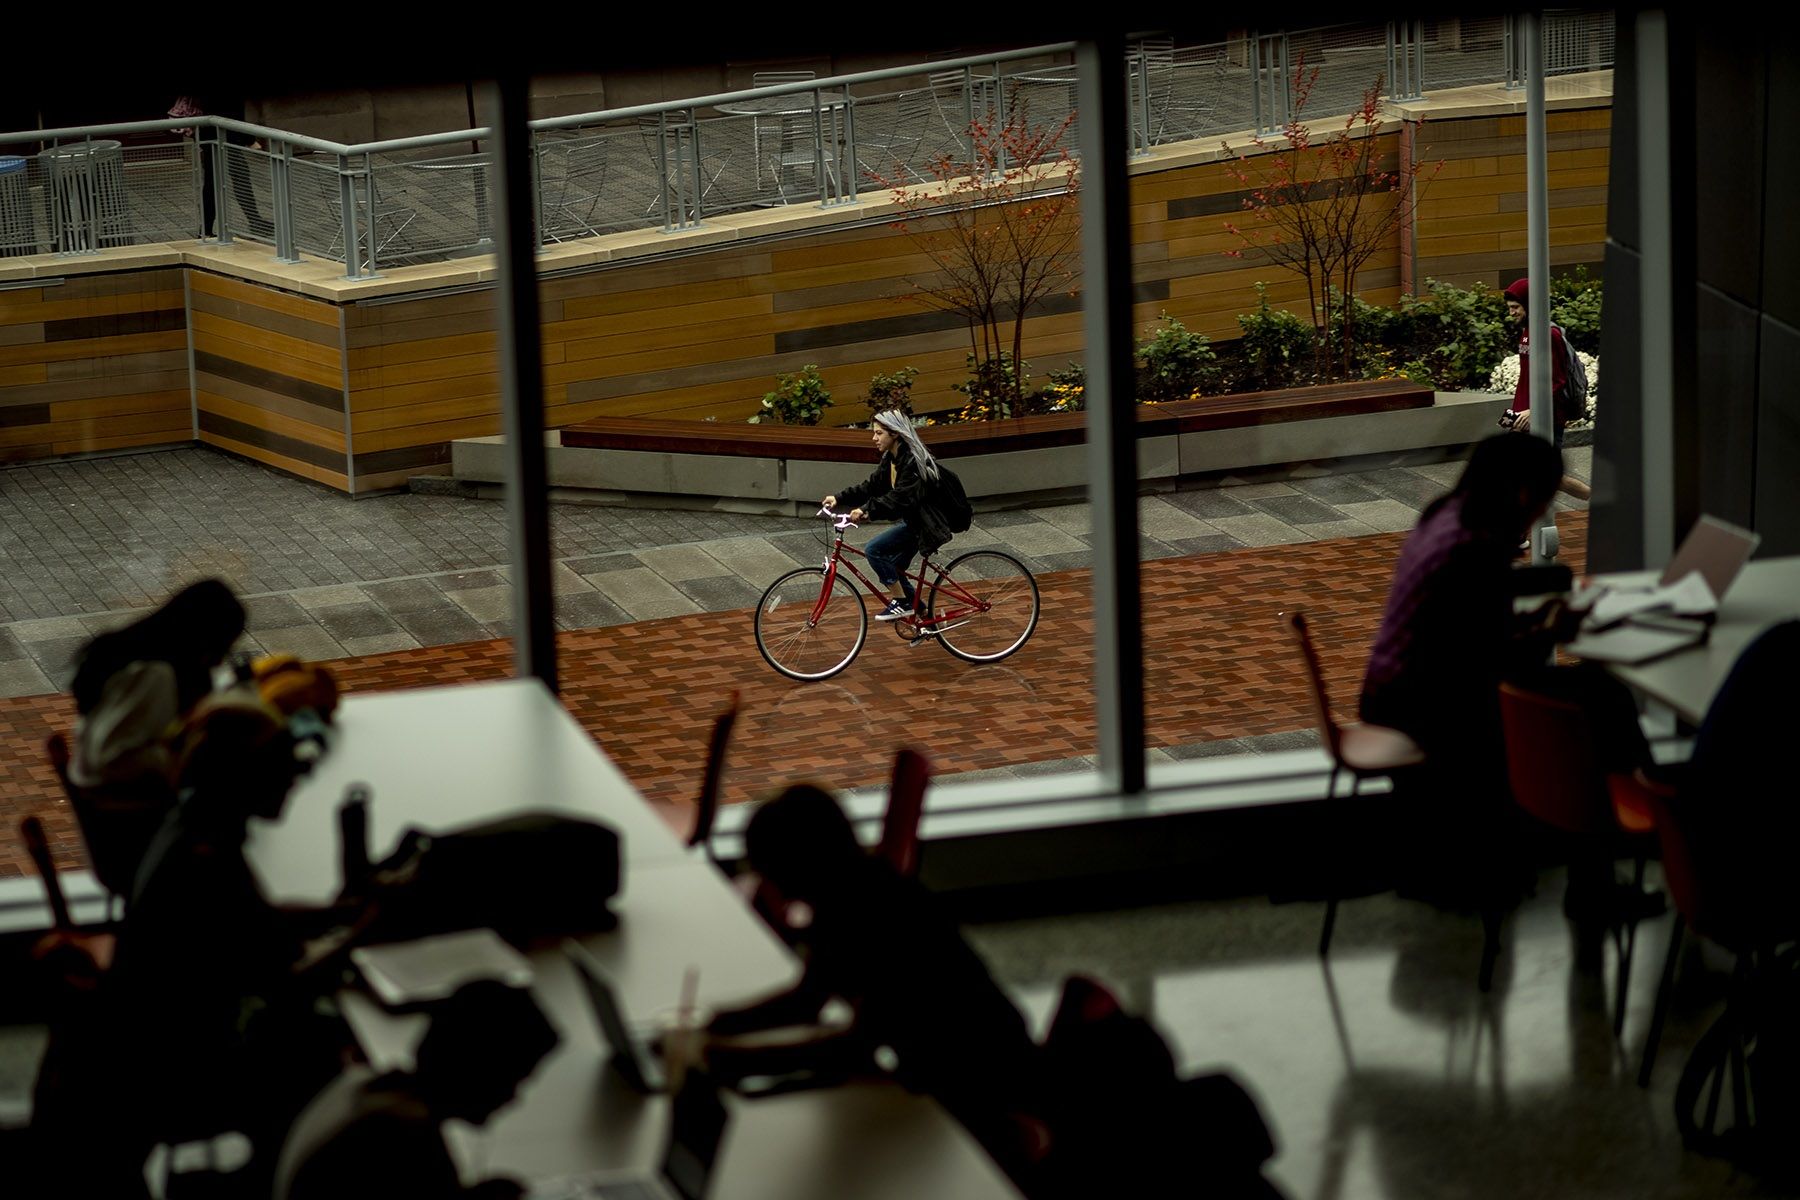 Students studying by a window that overlooks someone riding a bicycle.